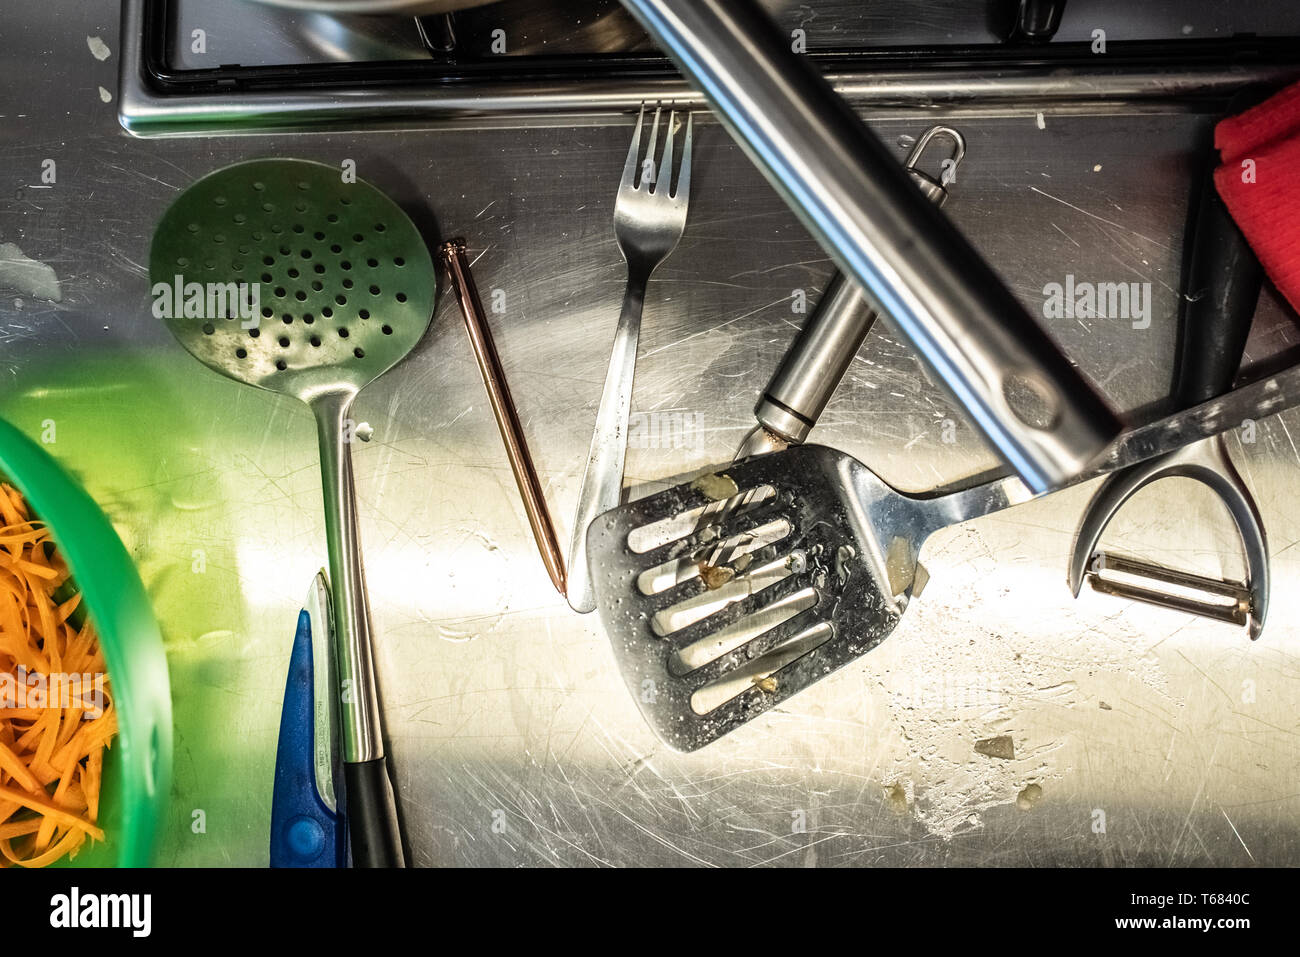 Kitchen utensils for scraping and peeling vegetables Stock Photo - Alamy